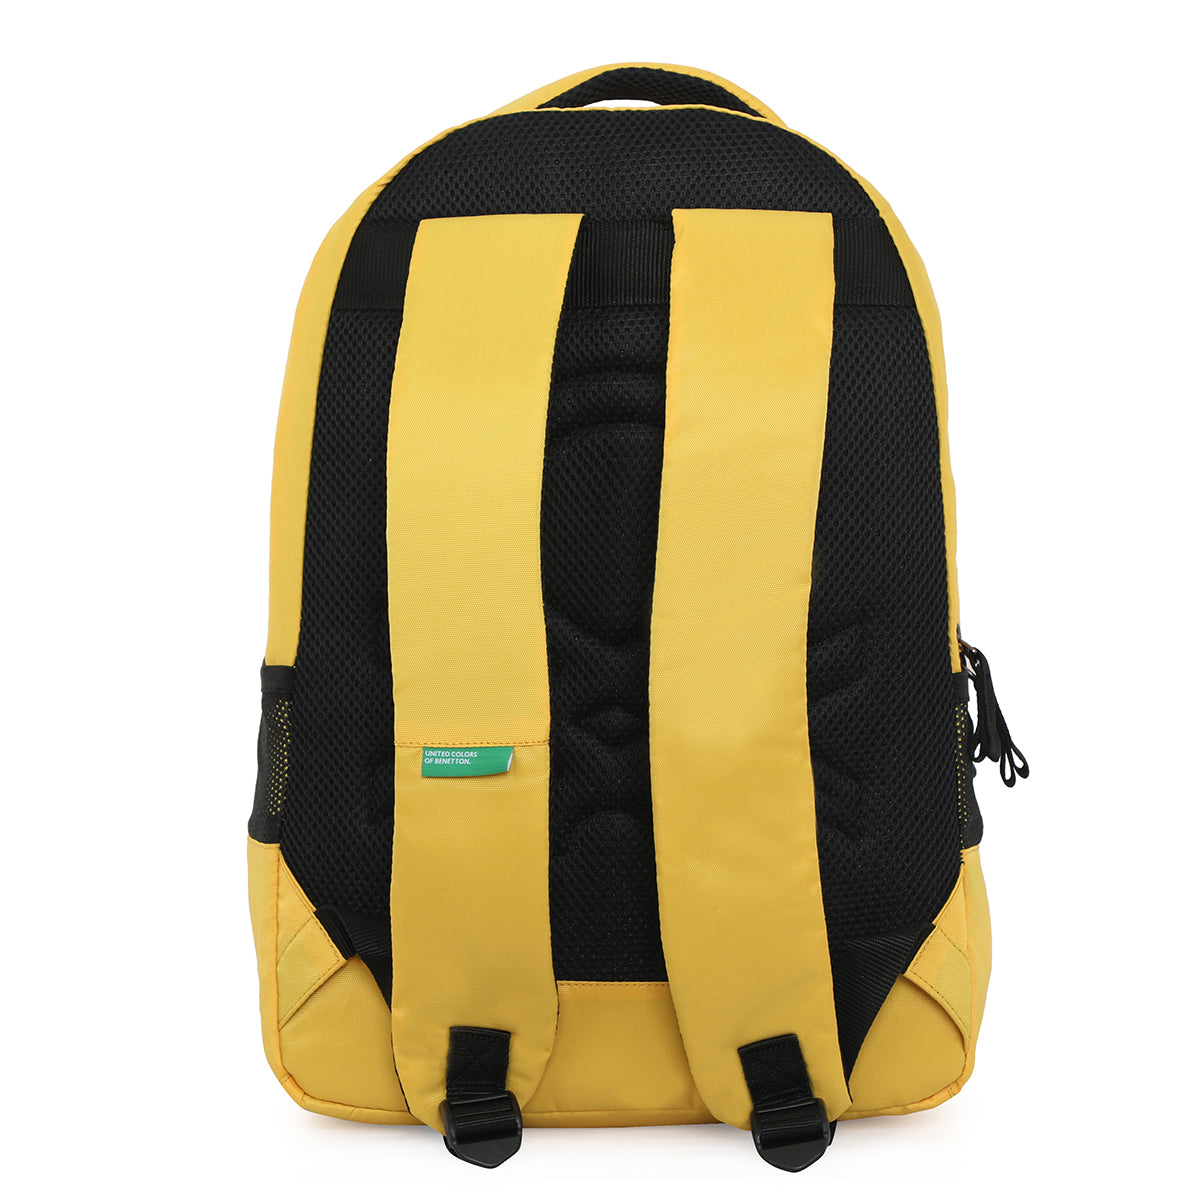 United Colors of Benetton Sable Laptop Backpack Non Laptop Backpack-Yellow